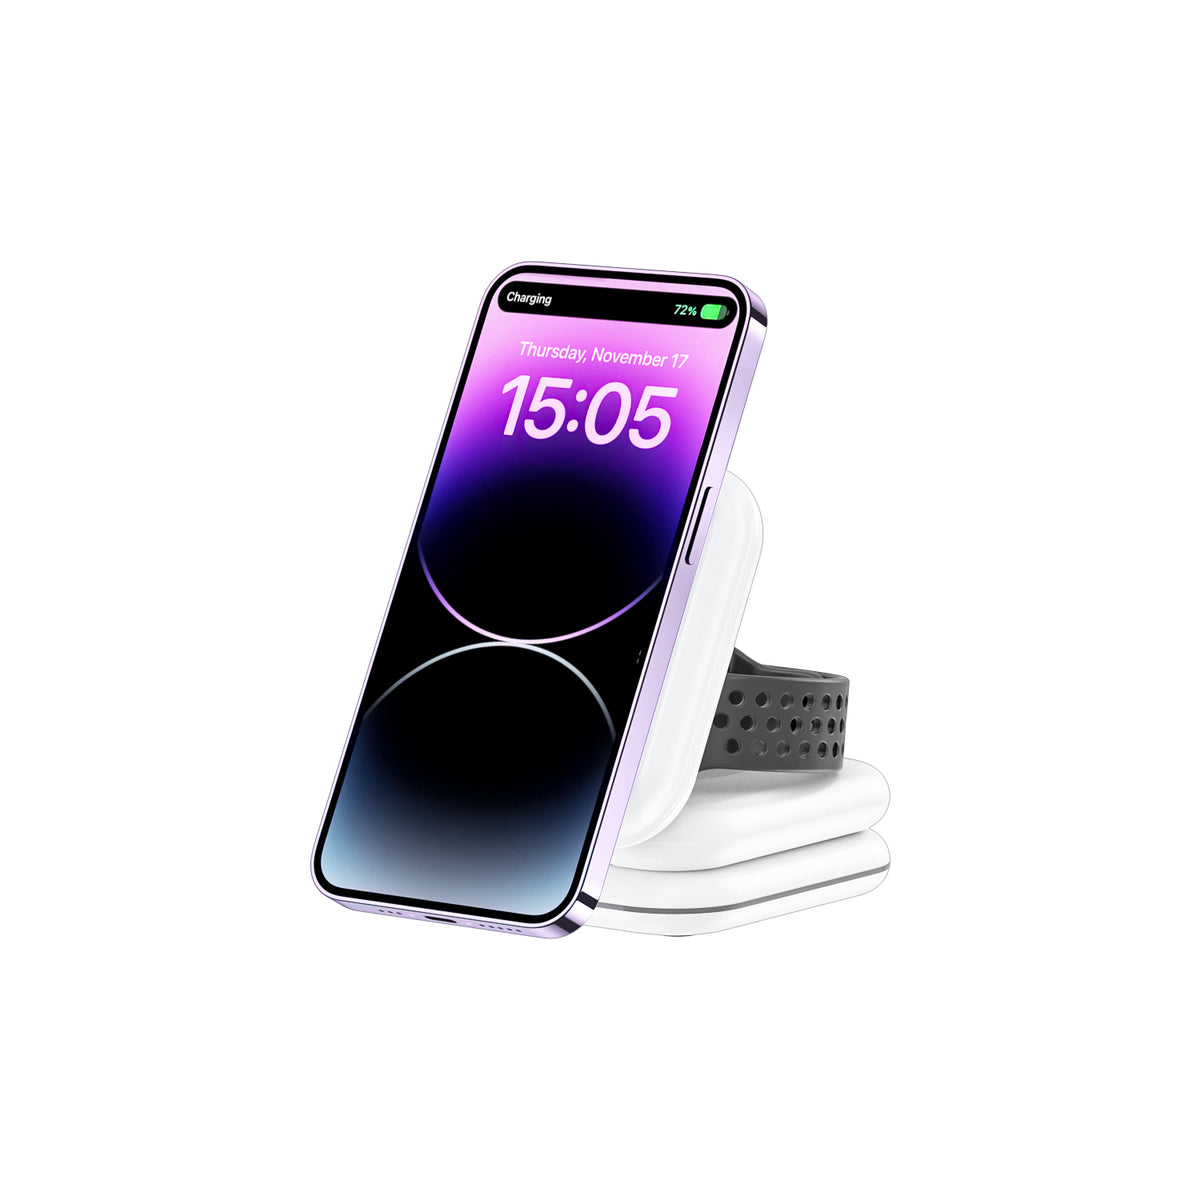 3-in-1 Foldable Wireless Charger for iPhones, Apple Watches, and AirPods